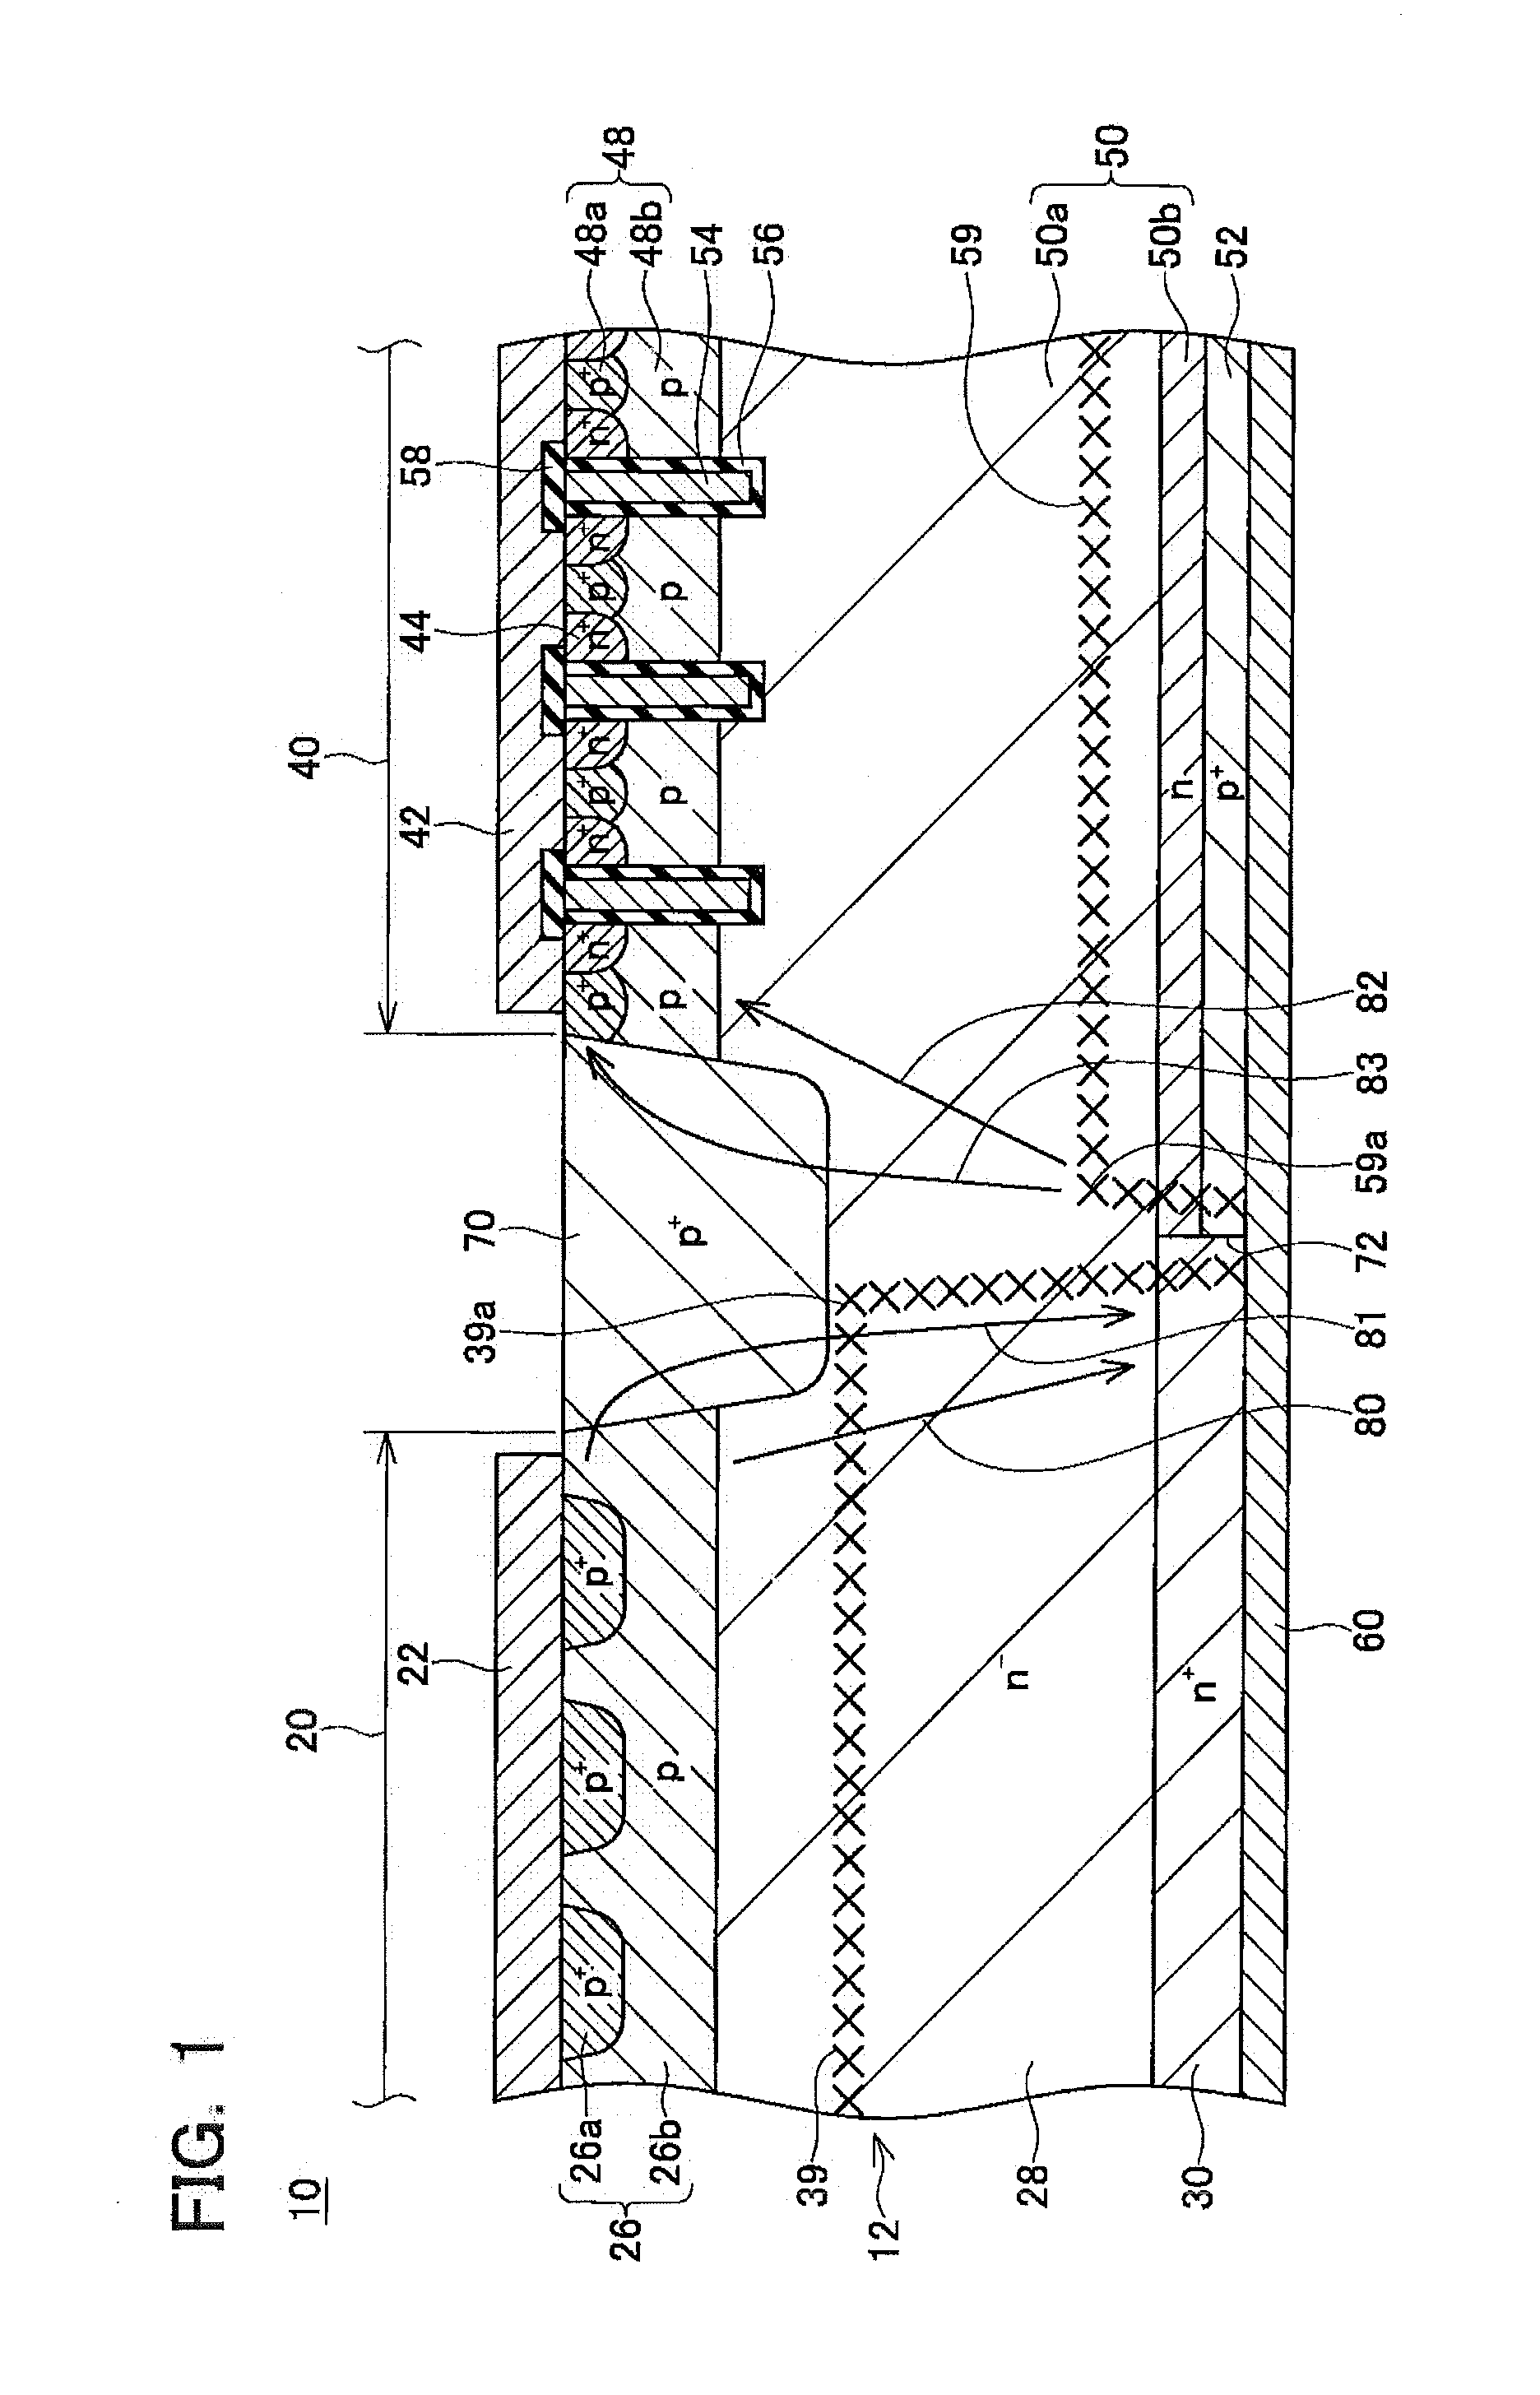 Semiconductor device having semiconductor substrate including diode region and IGBT region